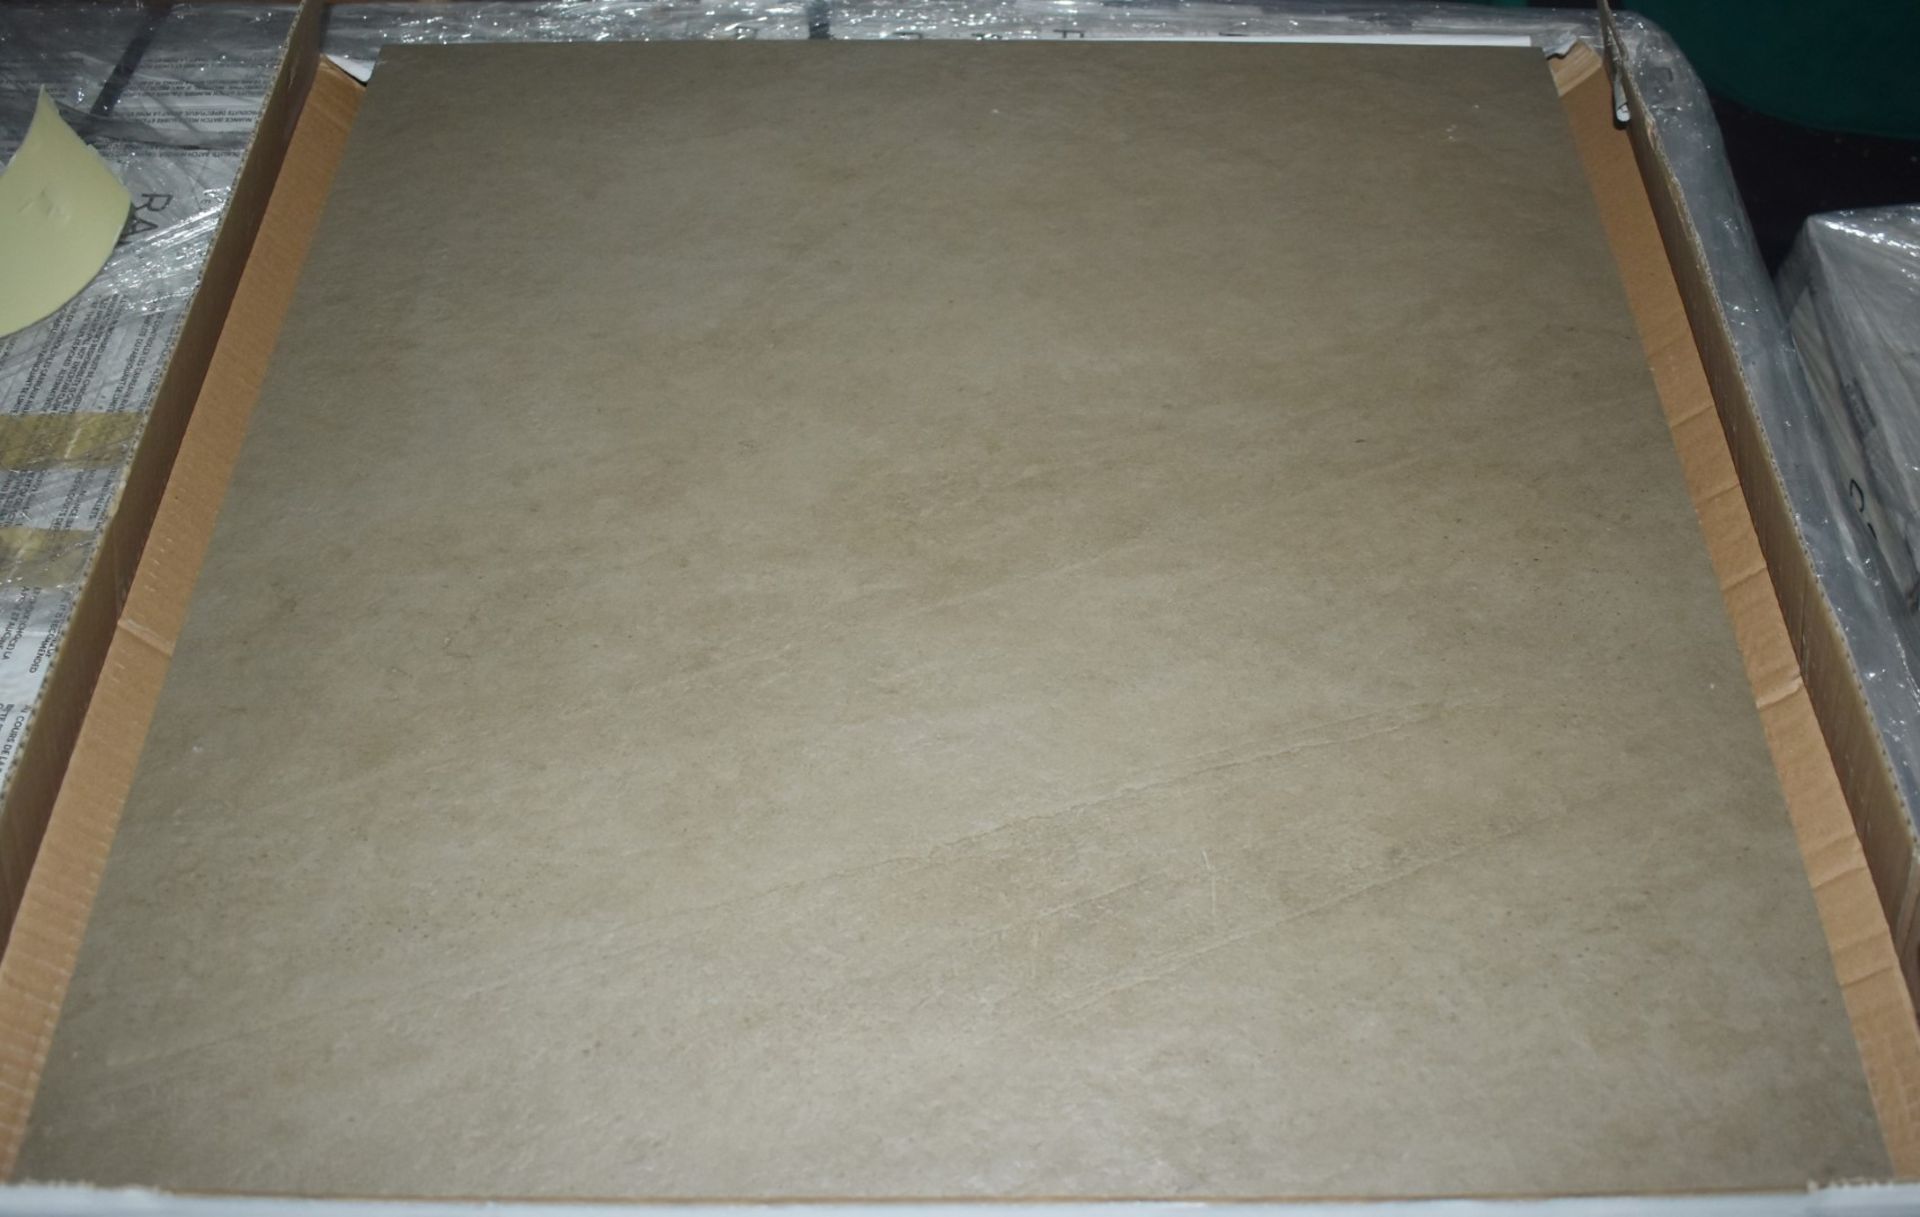 6 x Boxes of RAK Porcelain Floor or Wall Tiles - Concrete Design in Clay Brown - 60 x 60 cm Tiles - Image 7 of 8